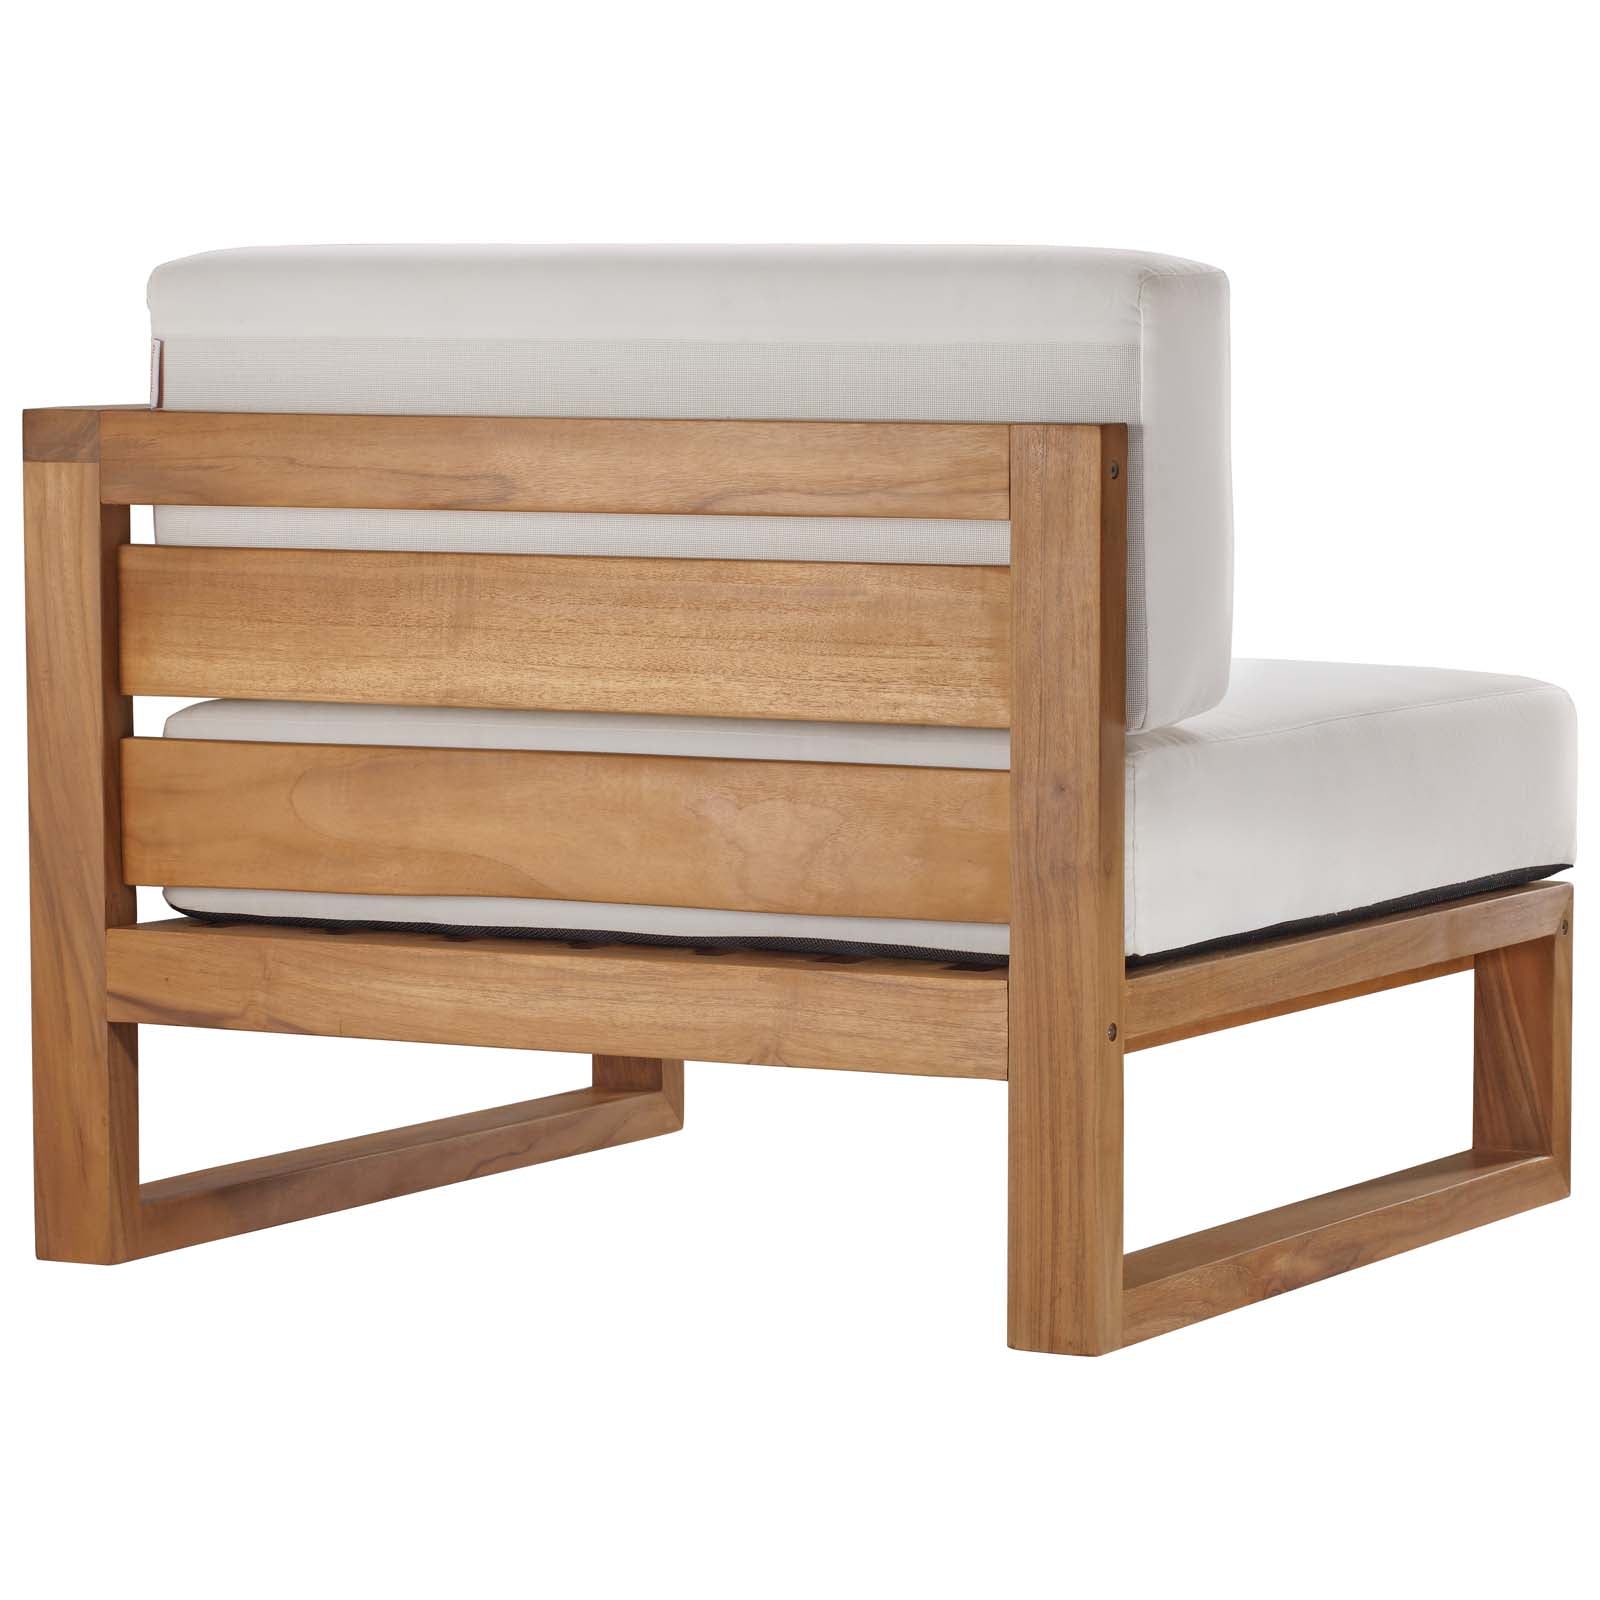 Modway Outdoor Chairs - Upland Outdoor Patio Teak Wood Right Arm Chair Natural White